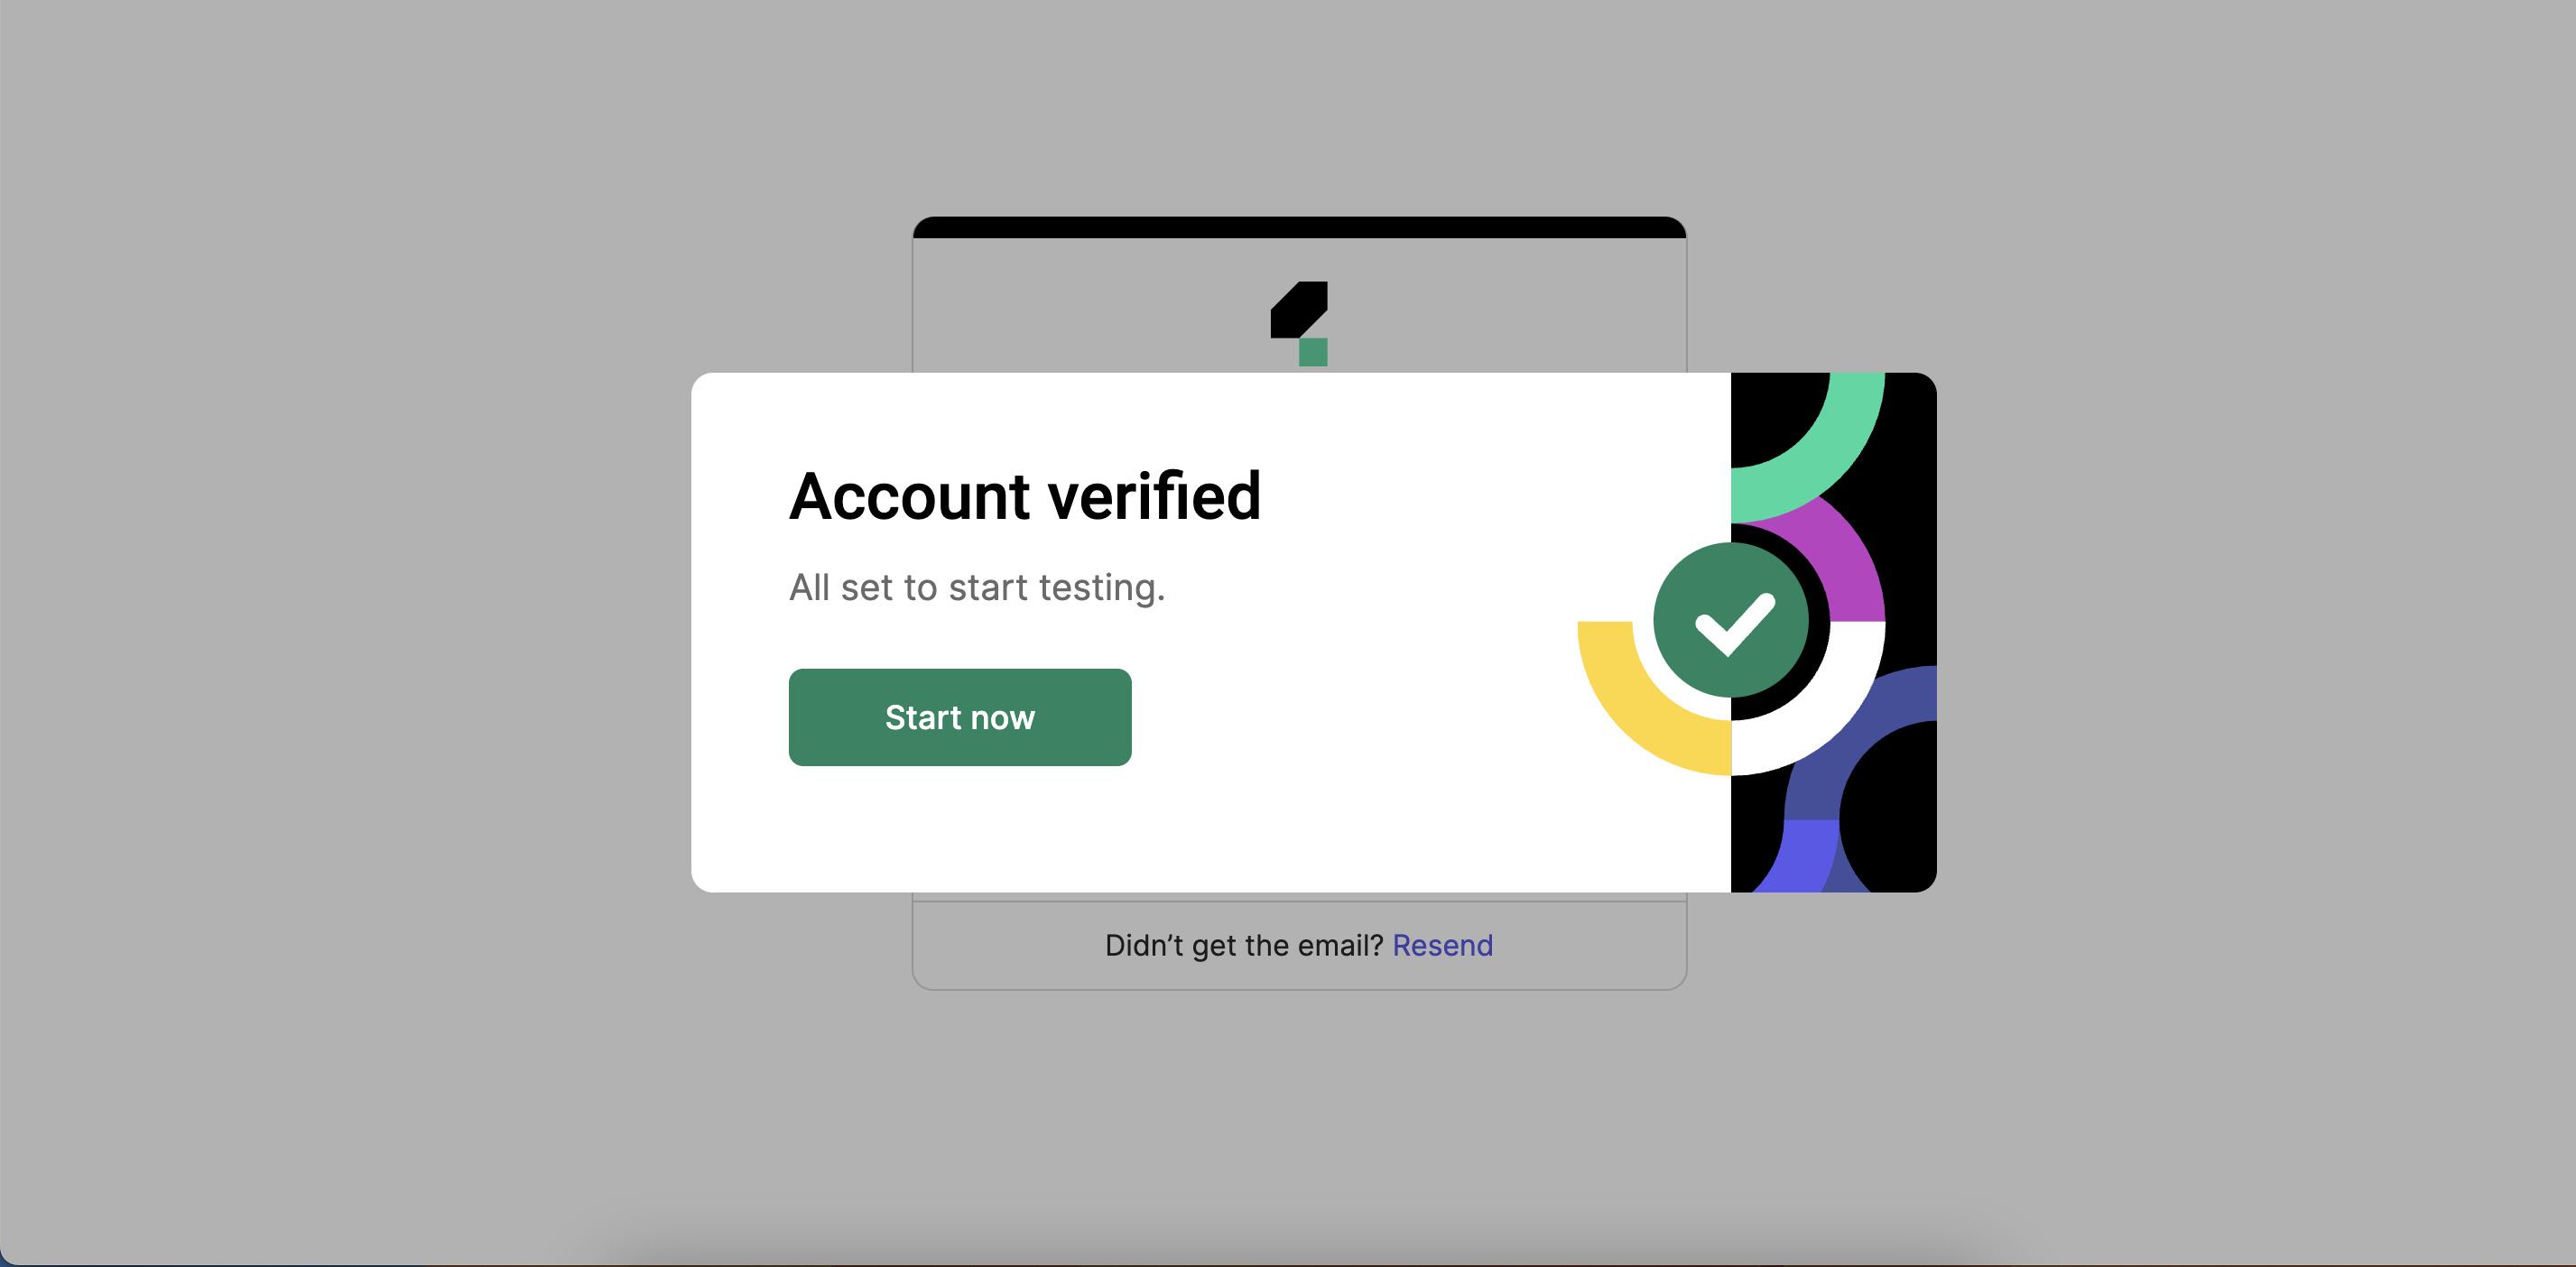 The Katalon Platform verifies your account. Click on start now to continue.